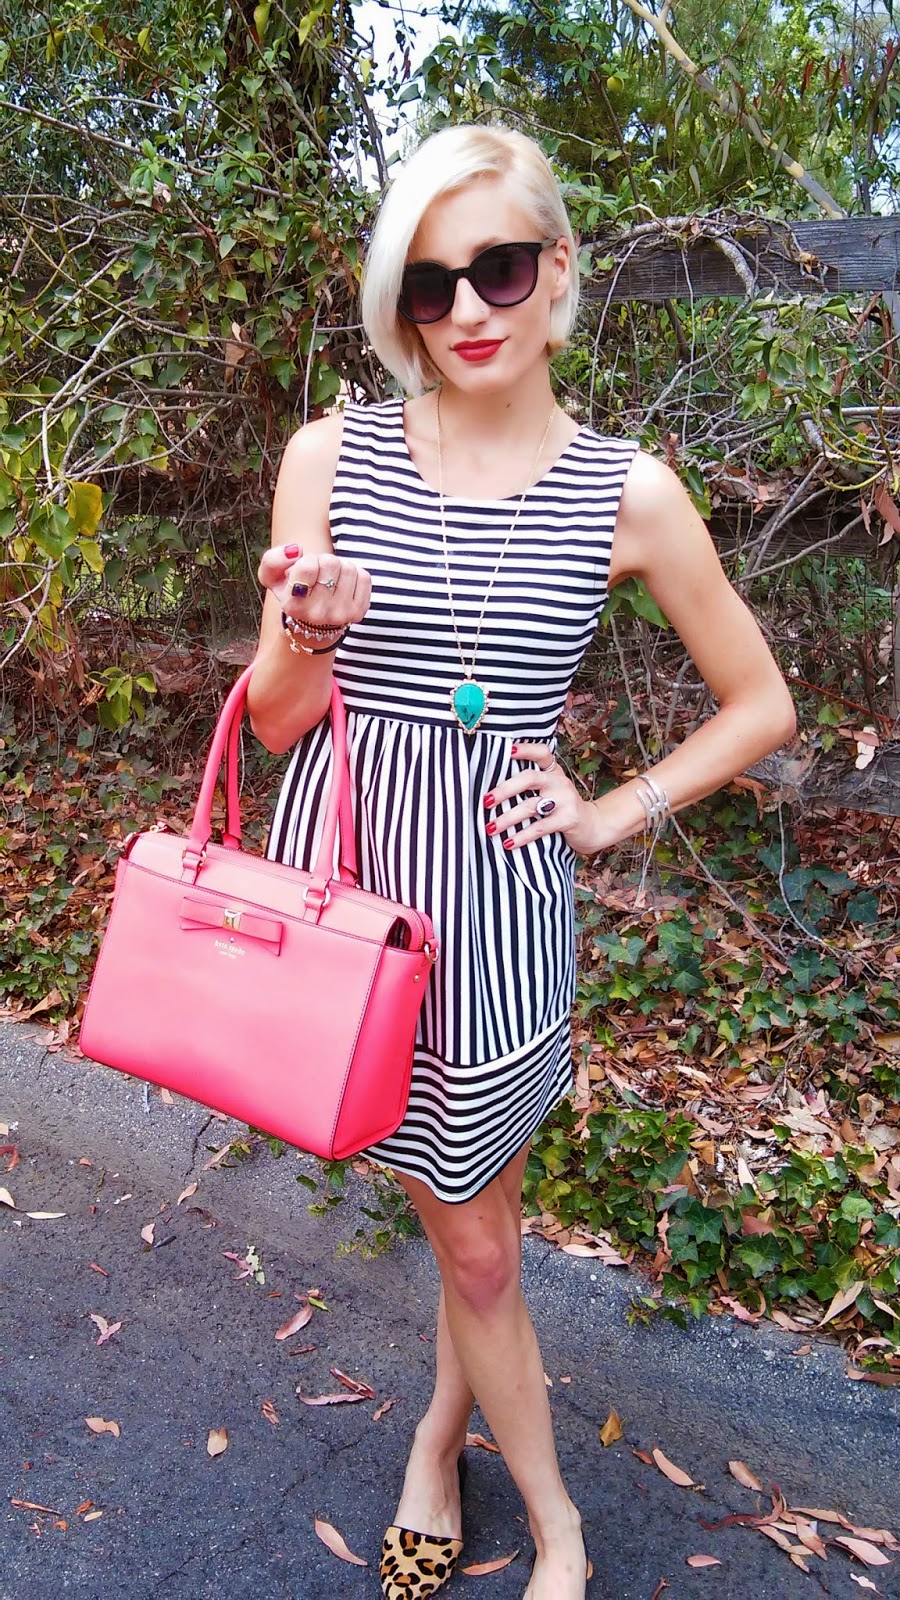 Inside Look At KCN: Stripes, Leopard, & Kate Spade...oh my!